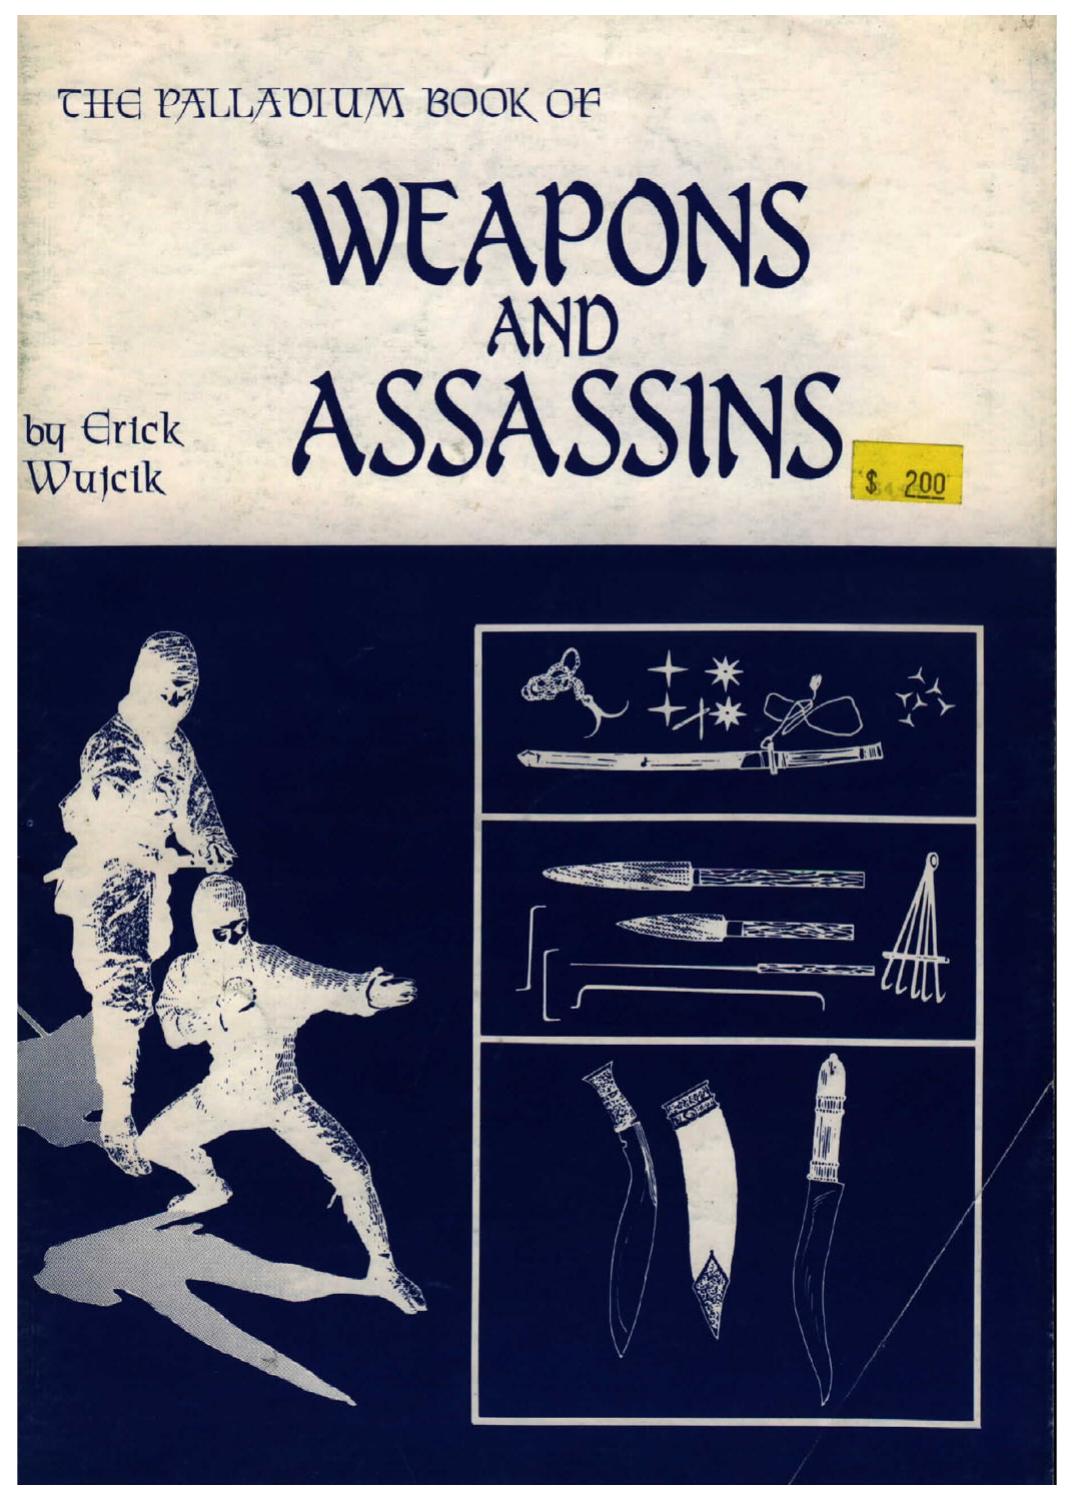 weapons and assasins.pdf